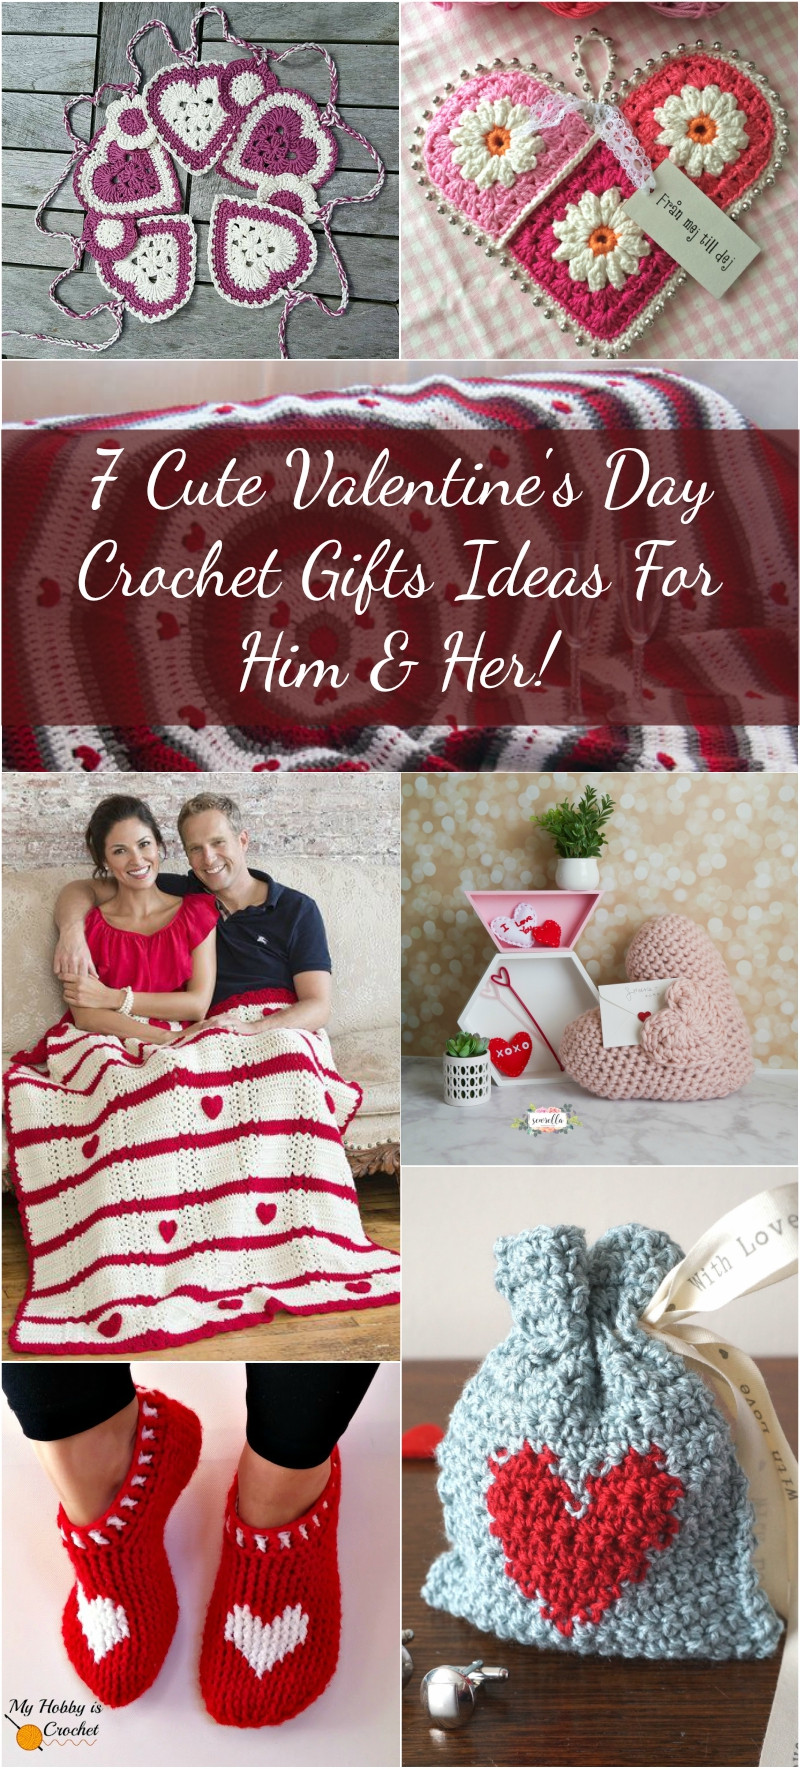 Cute Ideas For Valentines Day For Her
 7 Cute Valentine s Day Crochet Gifts Ideas For Him & Her